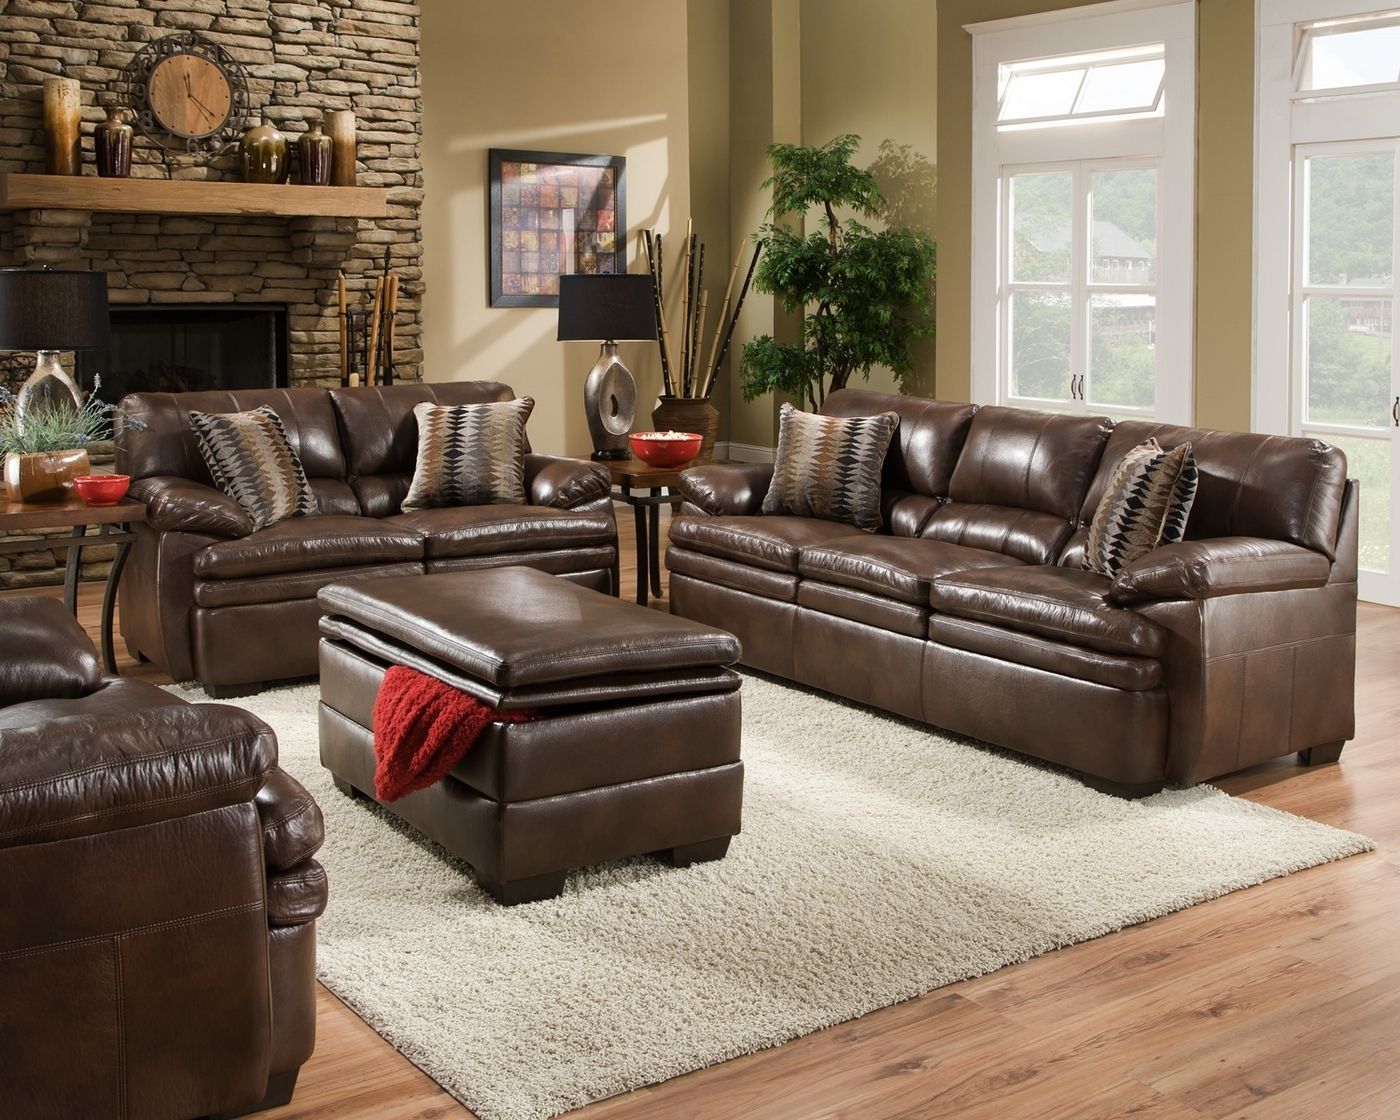 Brown Bonded Leather Sofa Set Casual Living Room Furniture Throughout Recent Leather Bench Sofas (View 14 of 14)